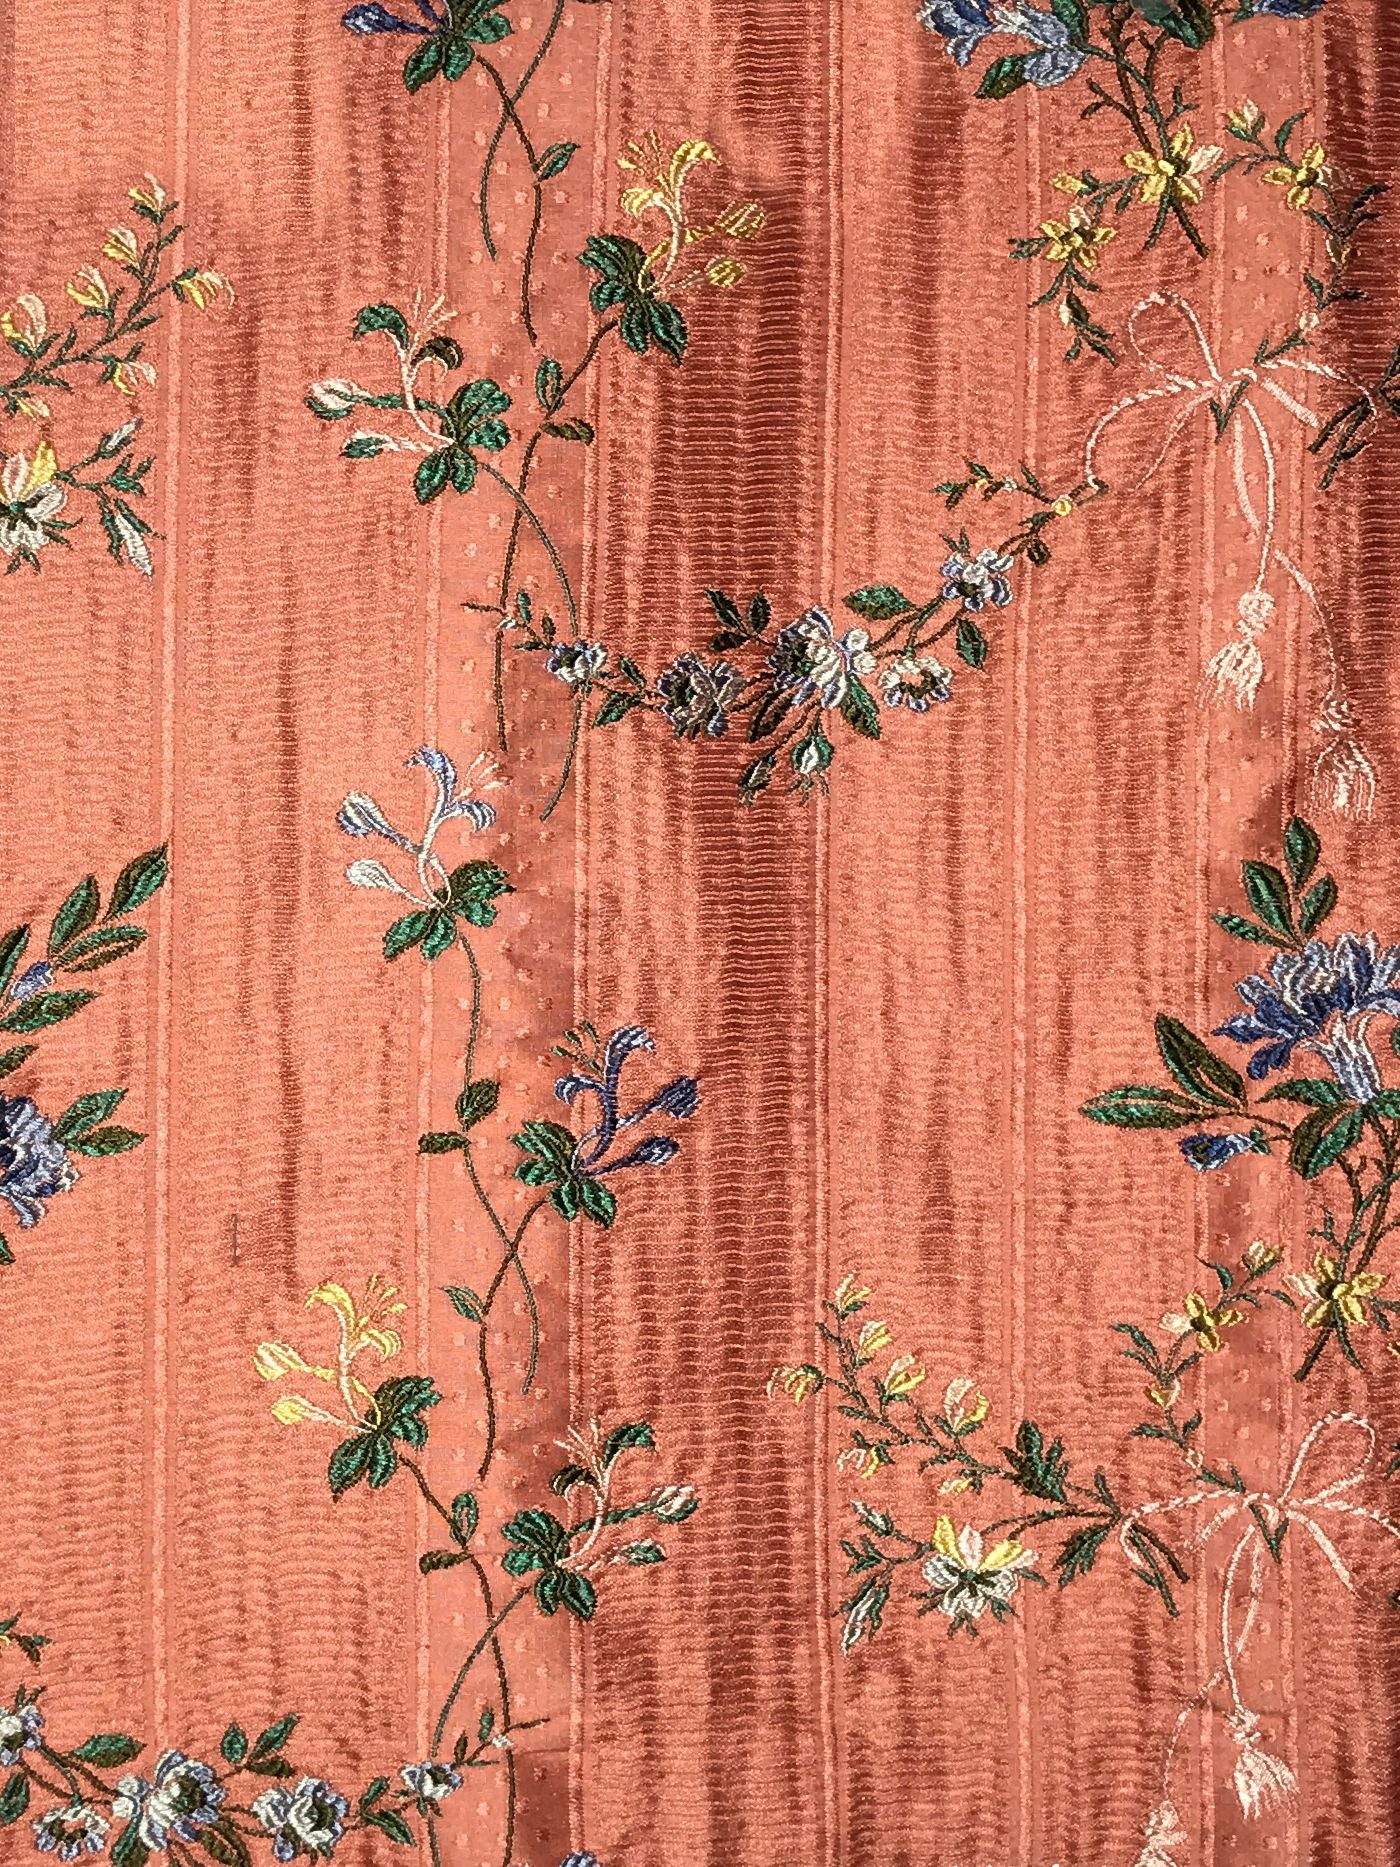 Broche Orleans fabric in apricot color - pattern number SB 00089326 - by Scalamandre in the Old World Weavers collection